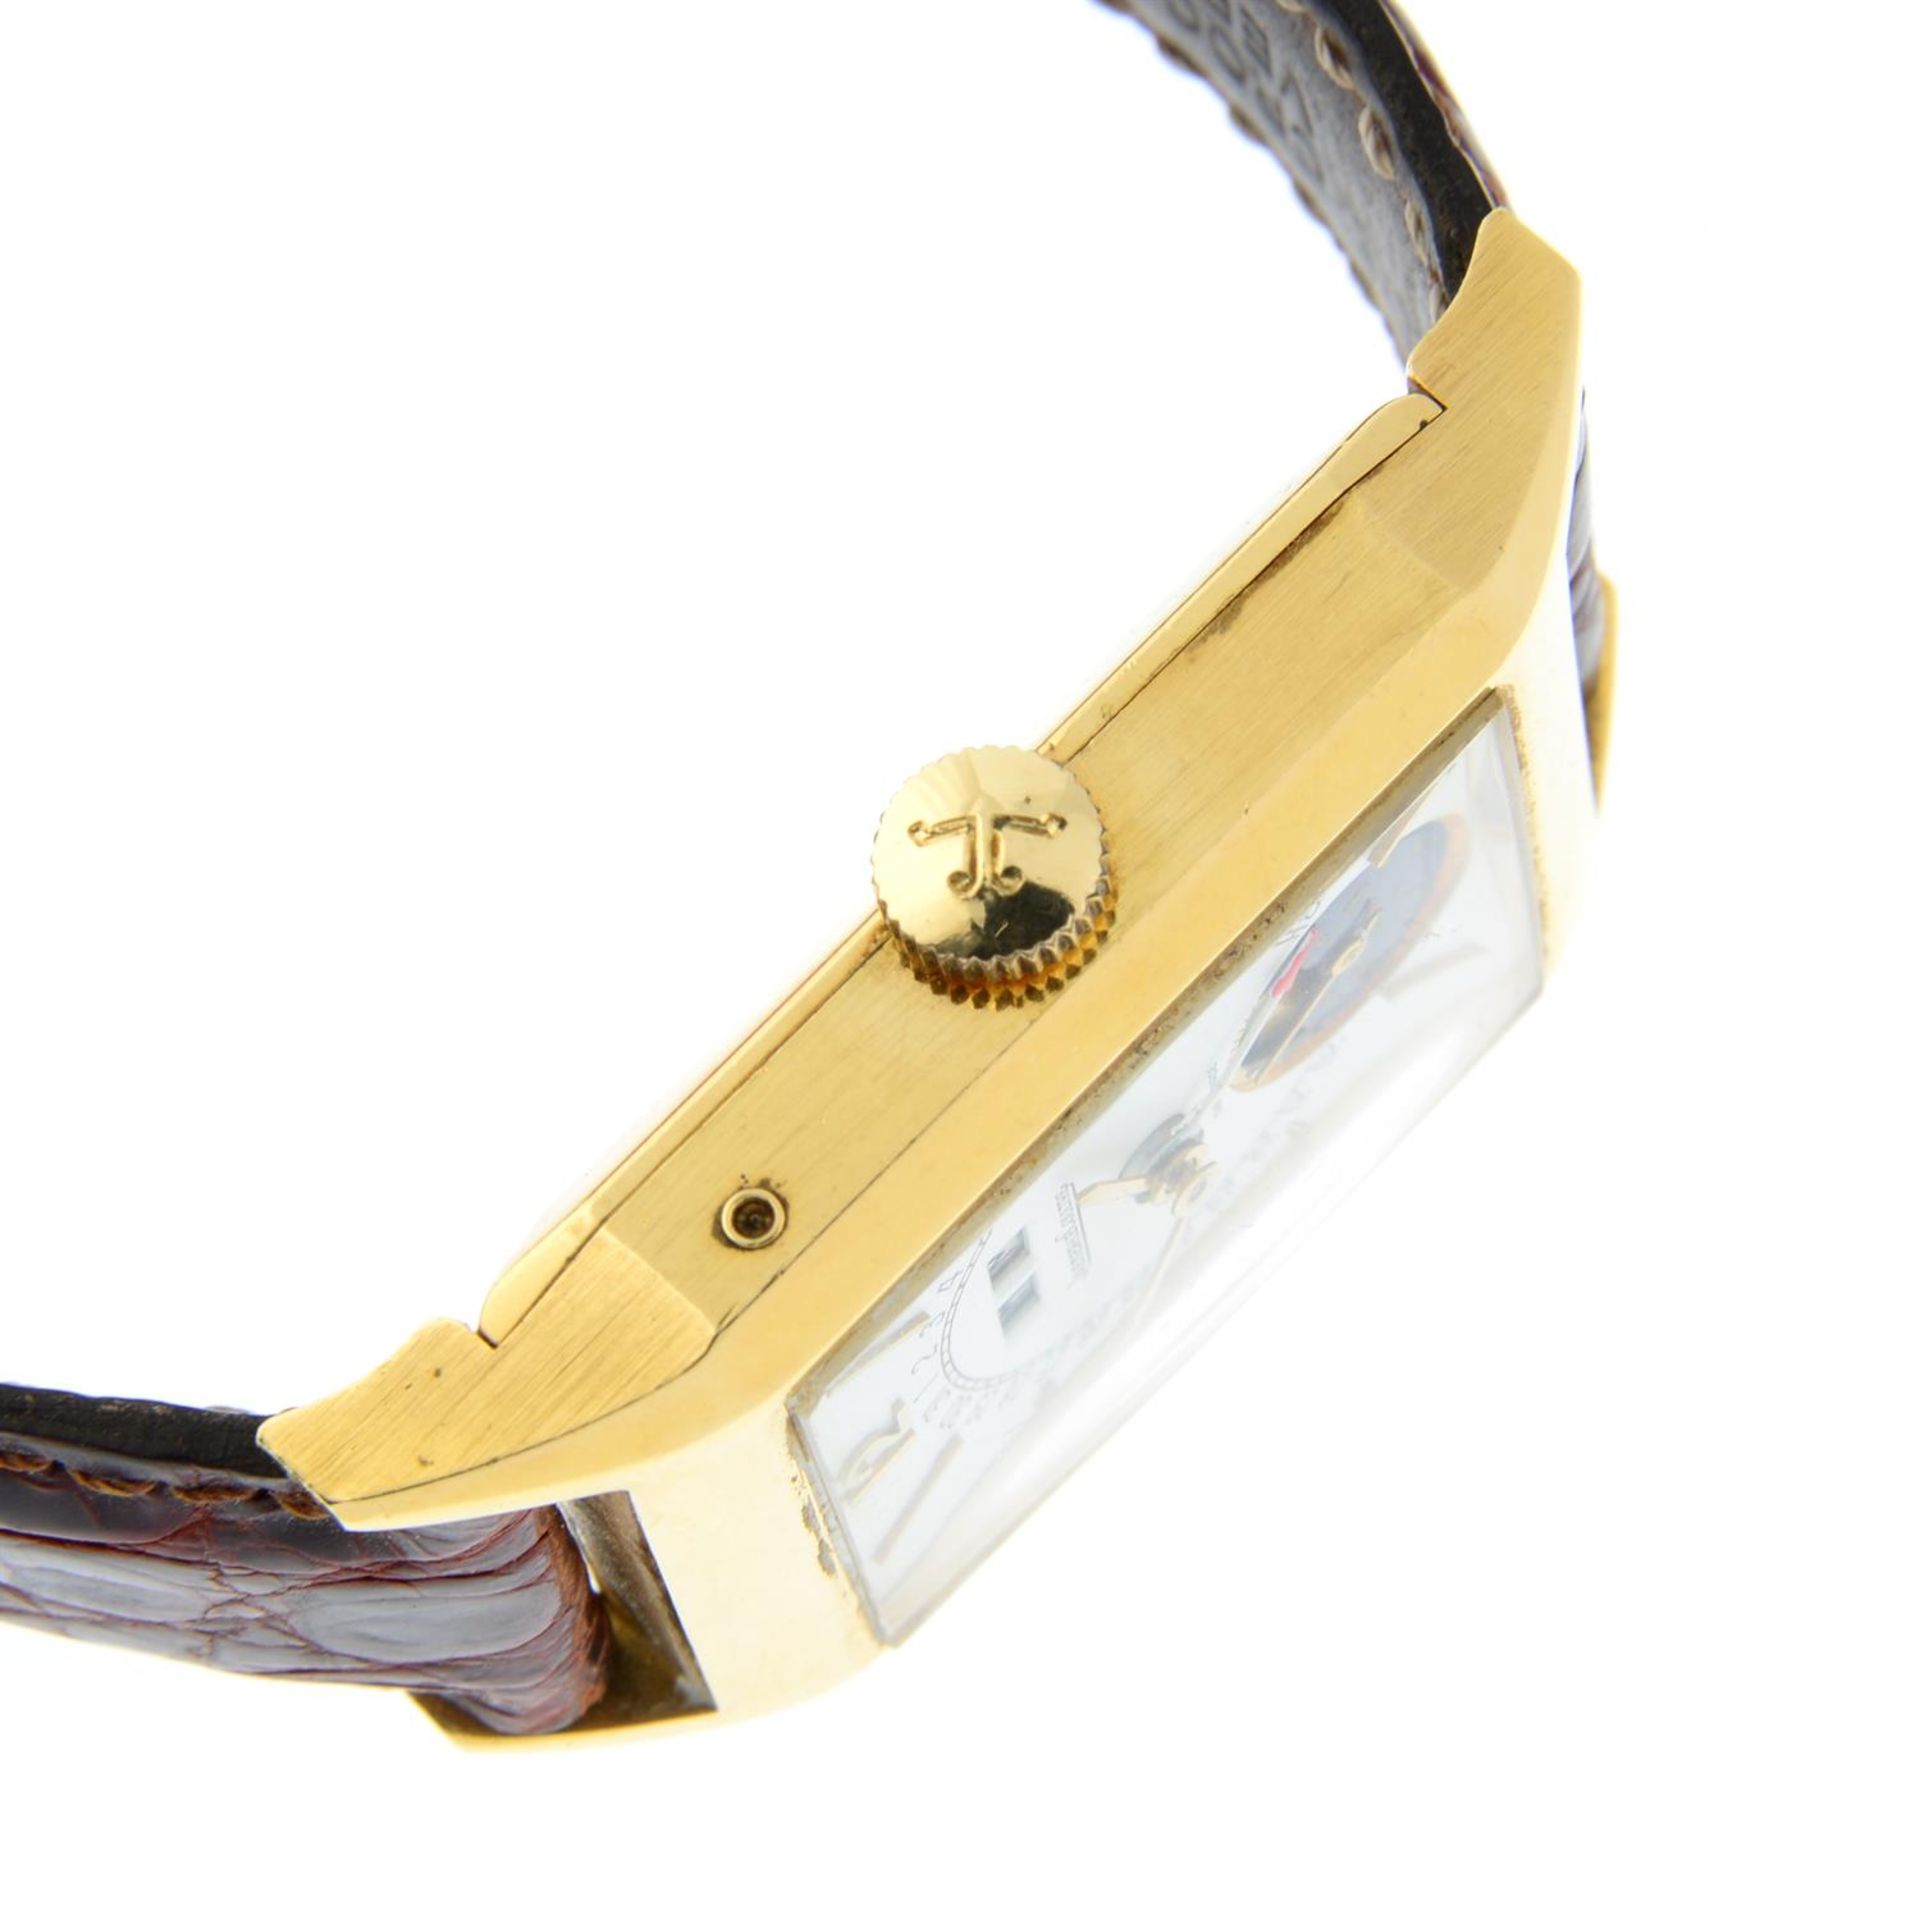 JAEGER-LECOULTRE - an 18ct yellow gold Serie Unique triple-calendar moonphase wrist watch, 24mm. - Image 3 of 7